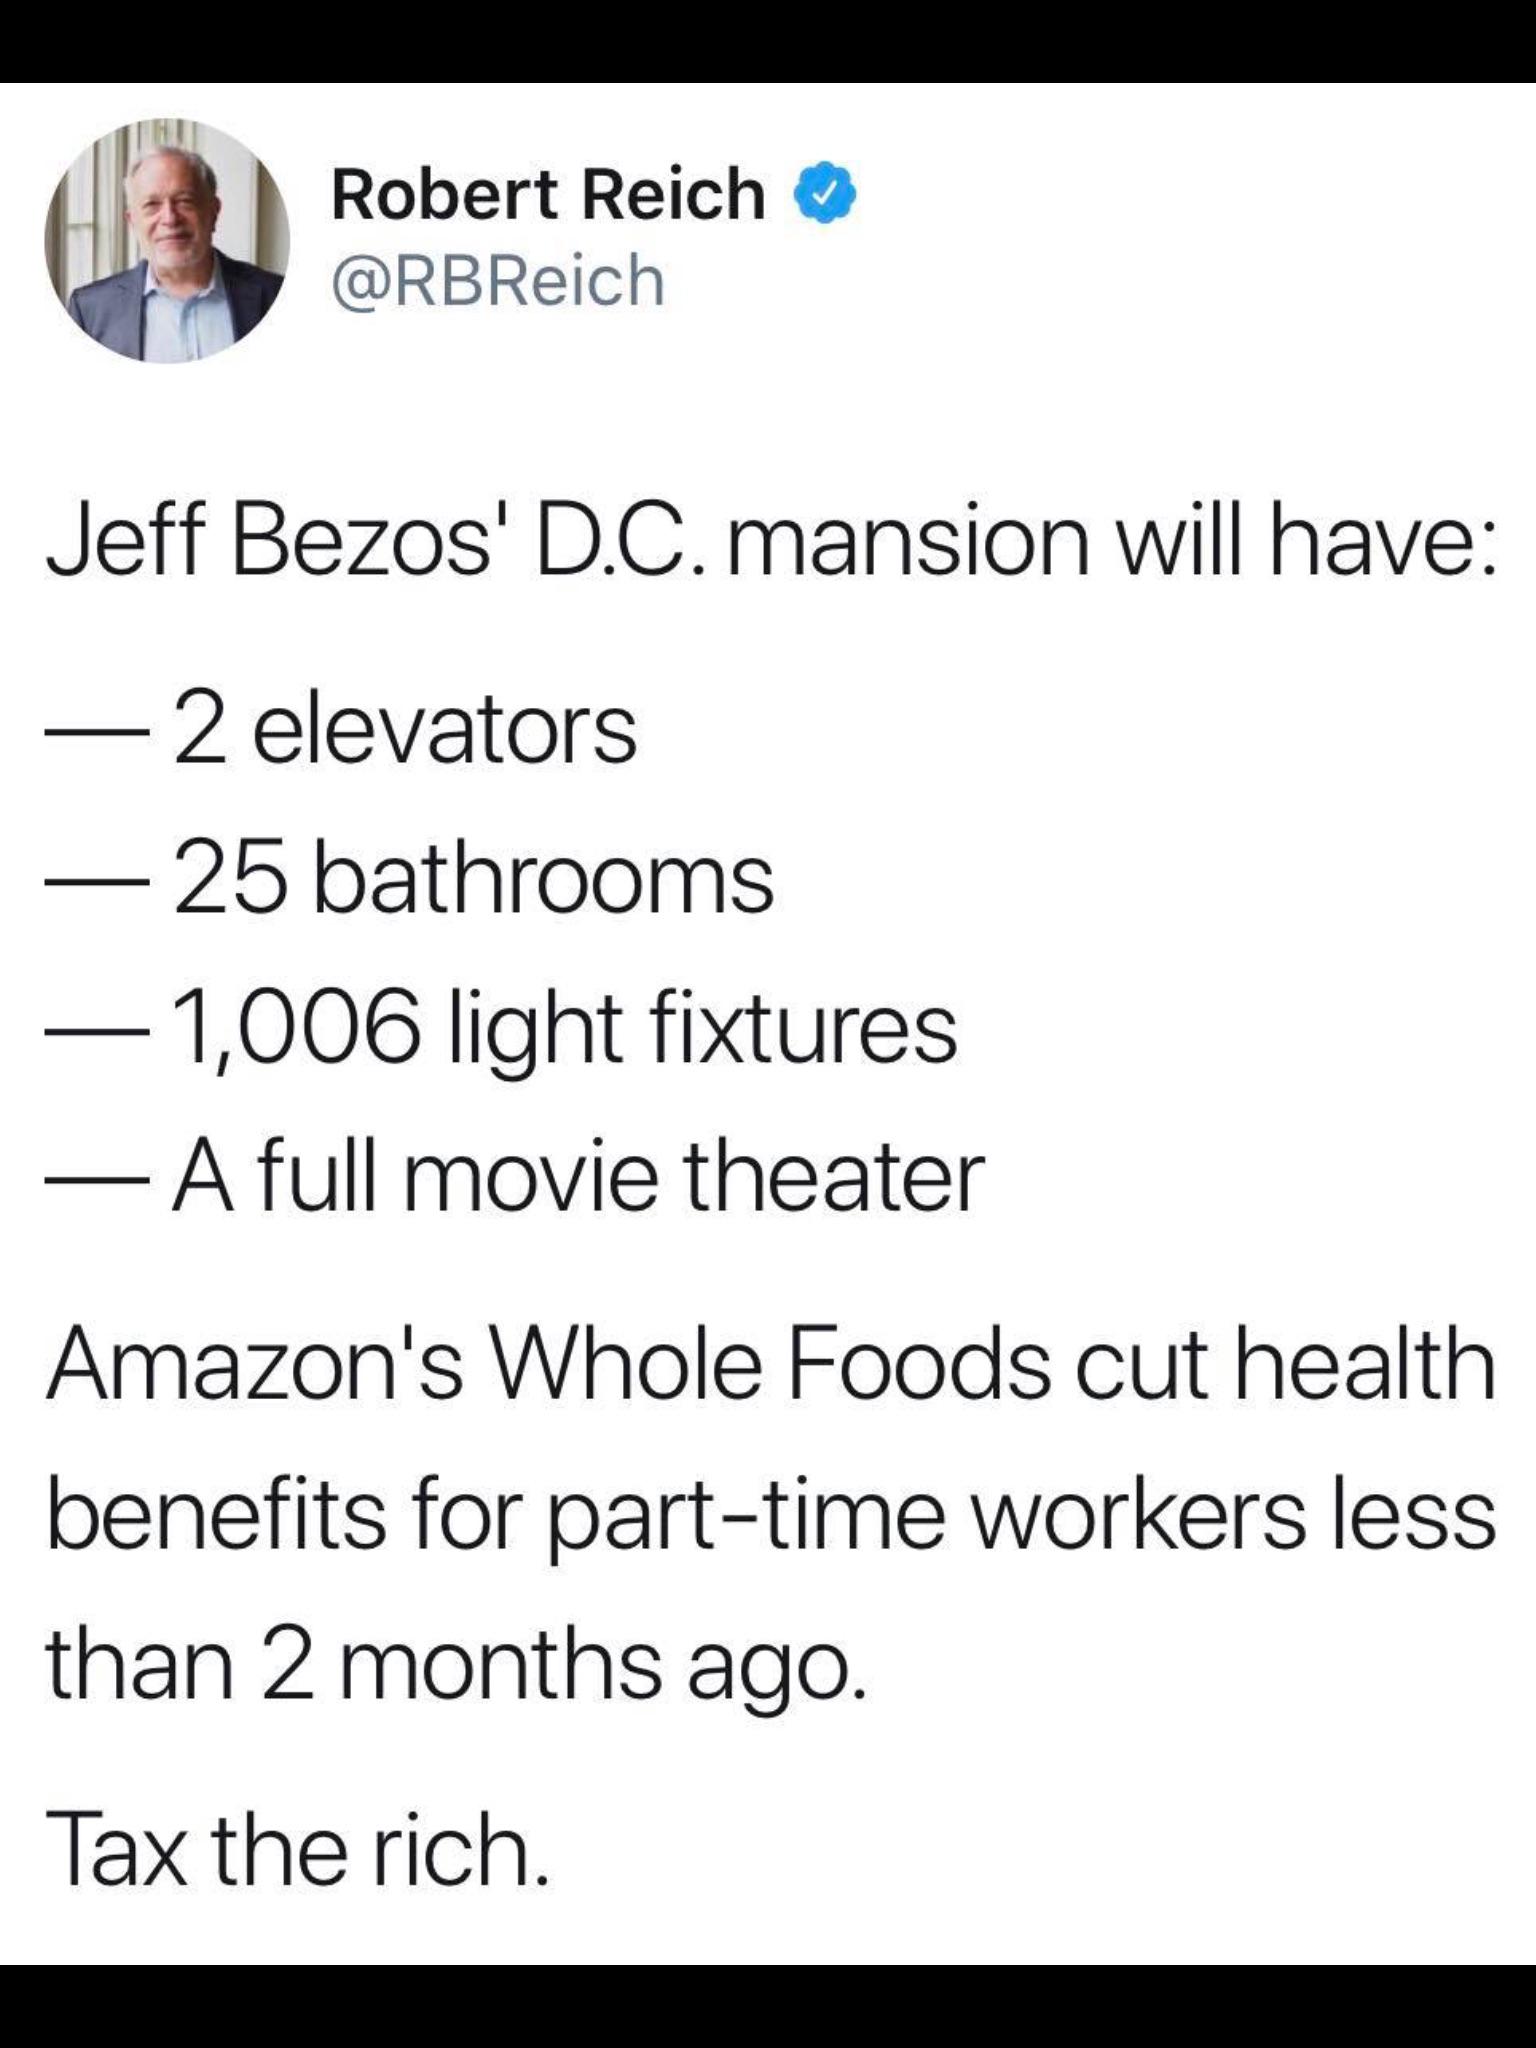 political political-memes political text: Robert Reich @RBReich Jeff Bezosl D.C. mansion will have: — 2 elevators — 25 bathrooms — 11006 light fixtures — A full movie theater Amazonls Whole Foods cut health benefits for part-time workers less than 2 months ago. Tax the rich. 